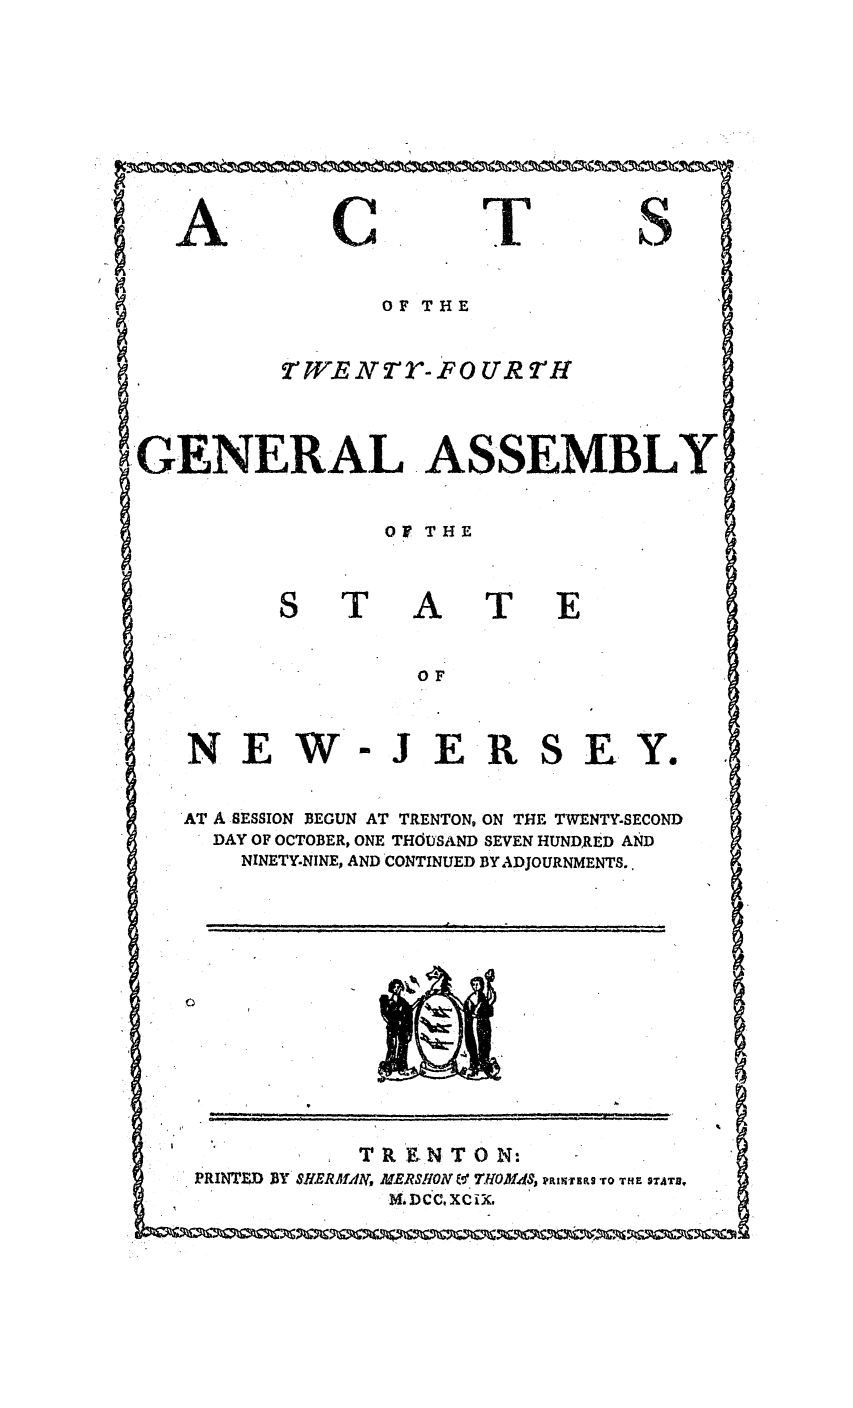 handle is hein.ssl/ssnj0270 and id is 1 raw text is: A

C

T

Q

OF THE

tWEN2R-FO UR r'H

GENERAL ASSEMBLY

Of THE

I

NEW

[AT
OF
-JER

SEY.

AT A SESSION BEGUN AT TRENTON, ON THE TWENTY-SECOND
DAY OF OCTOBER, ONE THOUSAND SEVEN HUNDRED AND
NINETY.NINE, AND CONTINUED BY ADJOURNMENTS..

PRINTZD BY

T RtIN T 0 N:
SHERAMfA, MERSHOAV T& 7VOM4S, RfiNTEs 'rO THE STATS.
b:Dcc, xcix.

. . .. .                  it  ,m  J,  ,  ,  °  . ... . ..  ,  I


